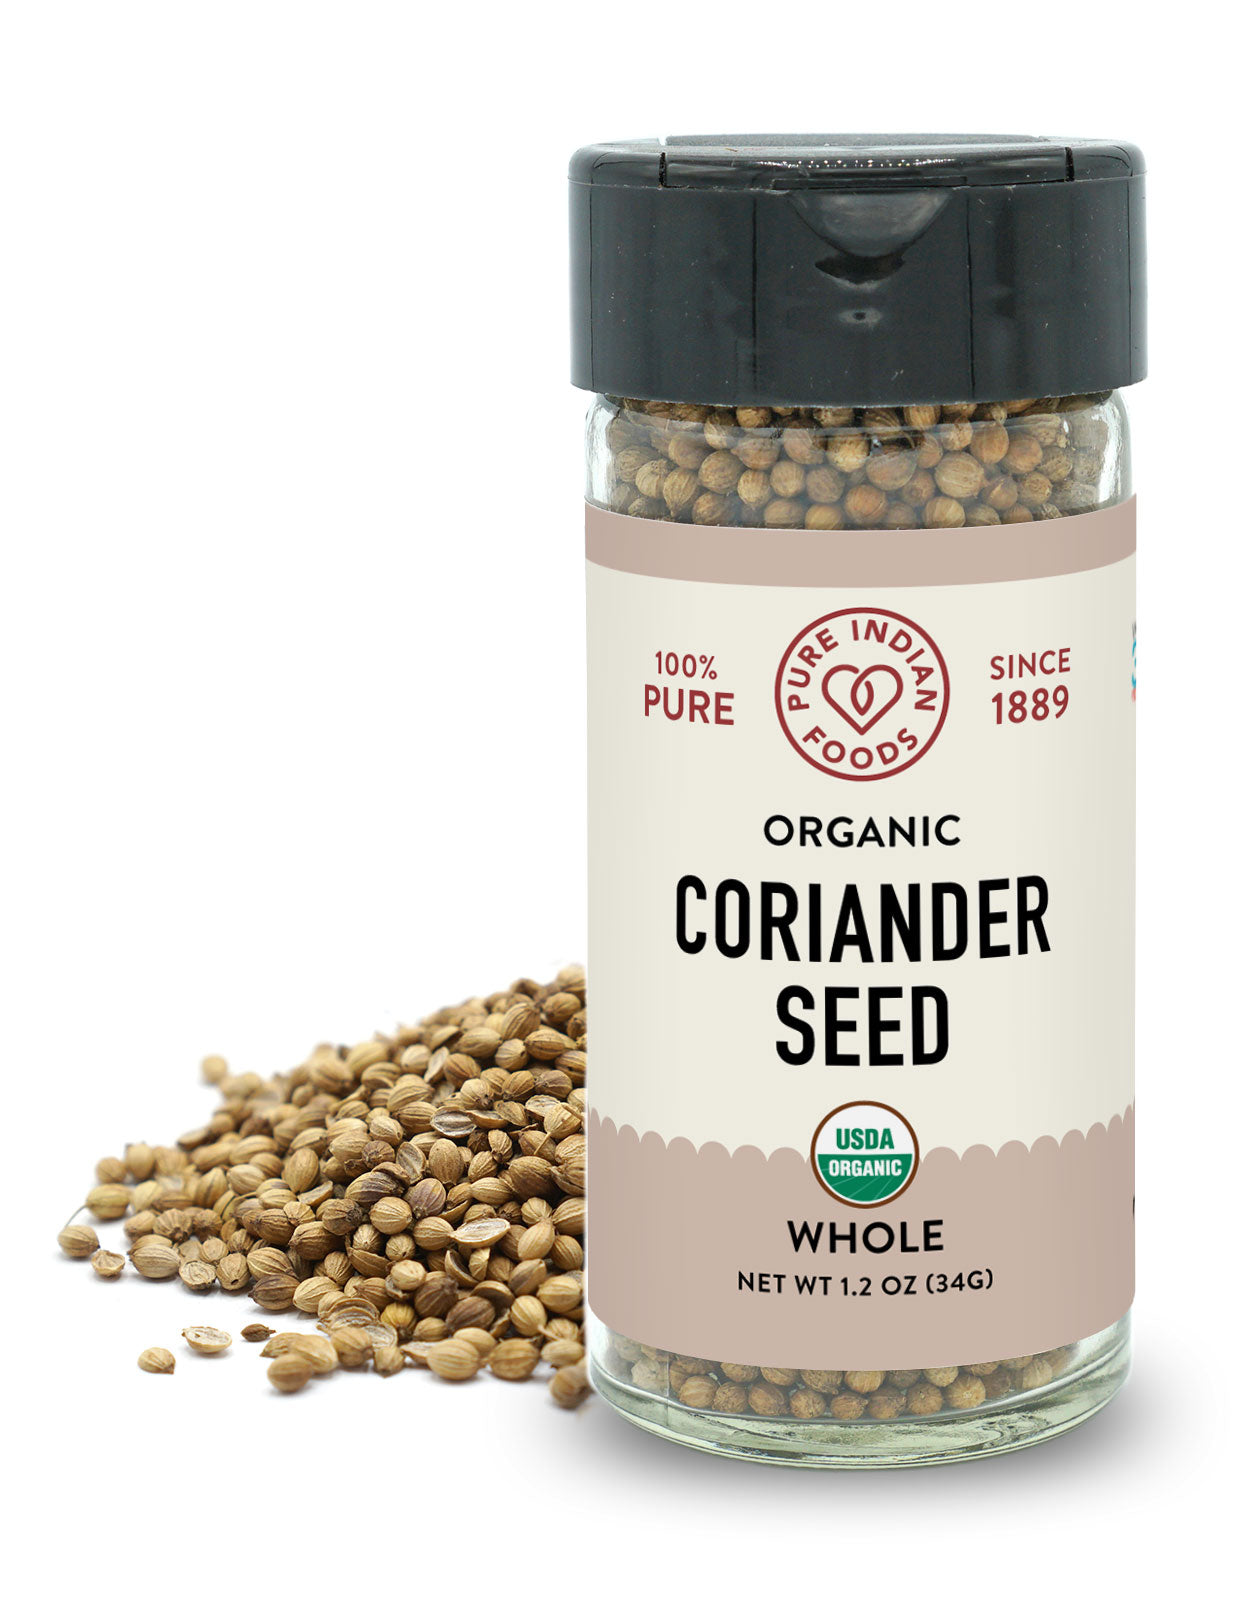 1.2 oz jar of whole organic coriander seed from Pure Indian Foods